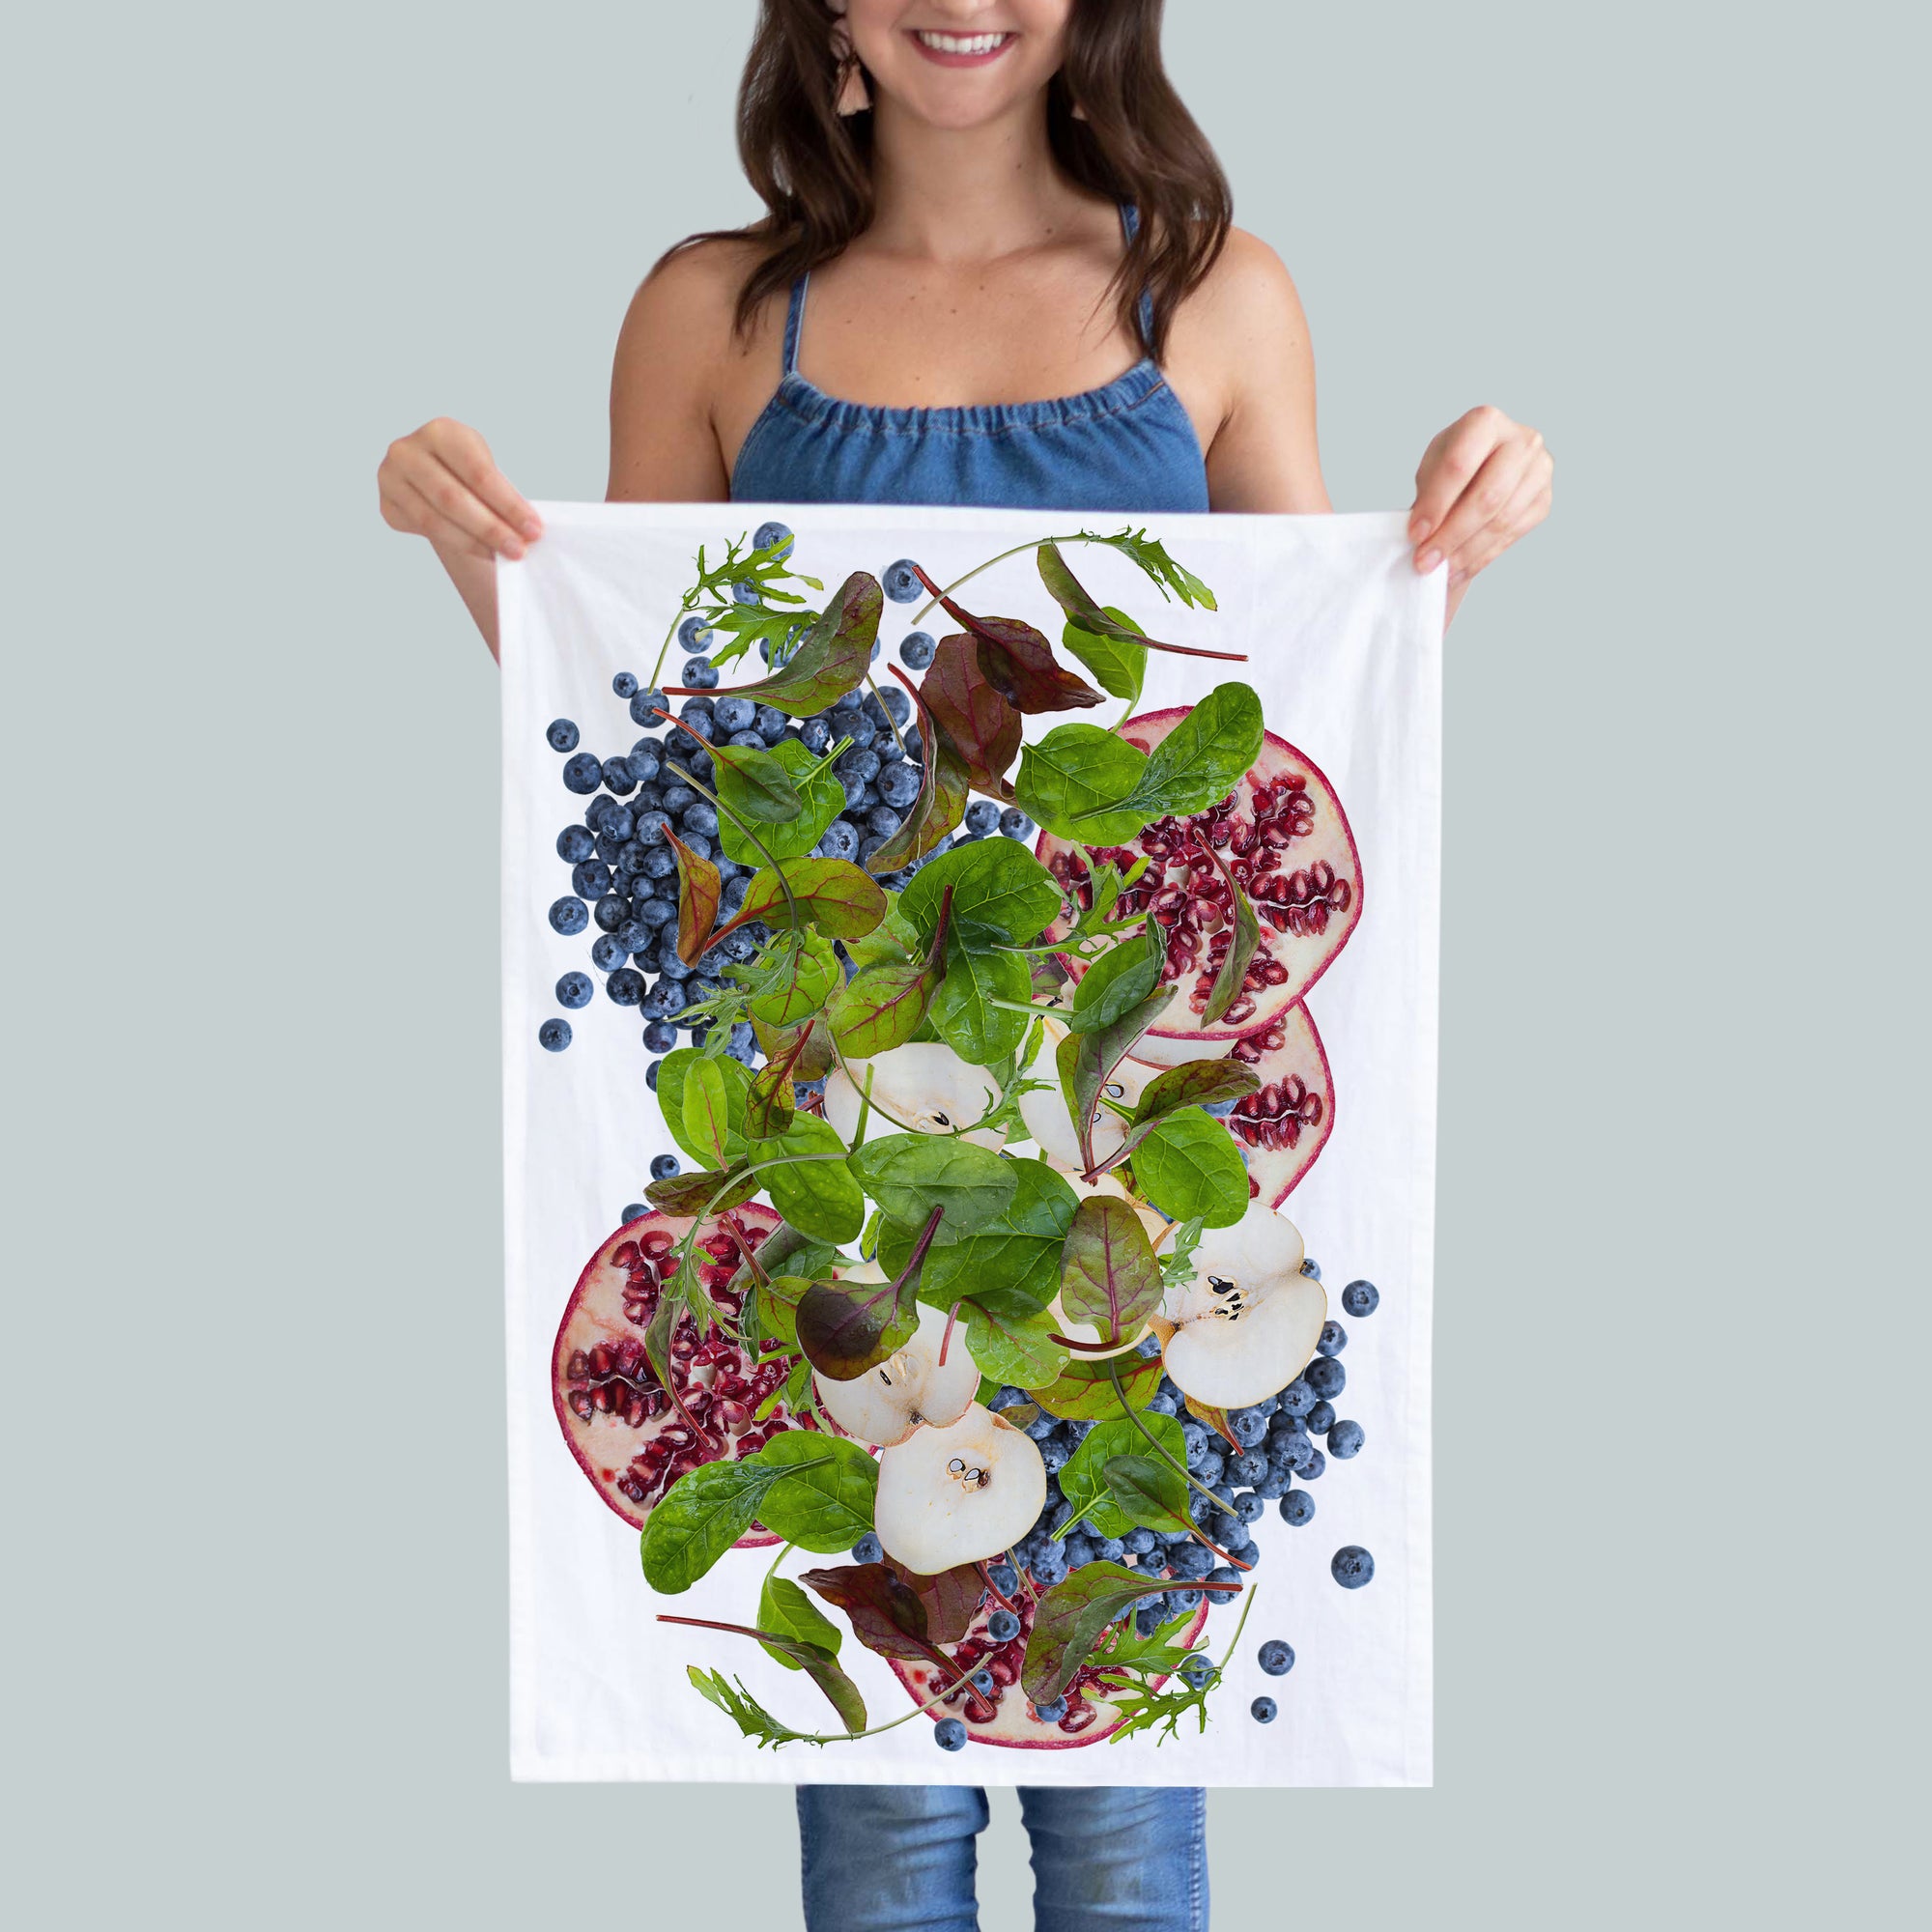 Pomegranate, apple, and blue berries kitchen towel. Few spinach leaves resembling that of a soon to be delicious salad. Hostess gift. Food photography by Pauline Stevens. 19" x 28" (7486055809247)